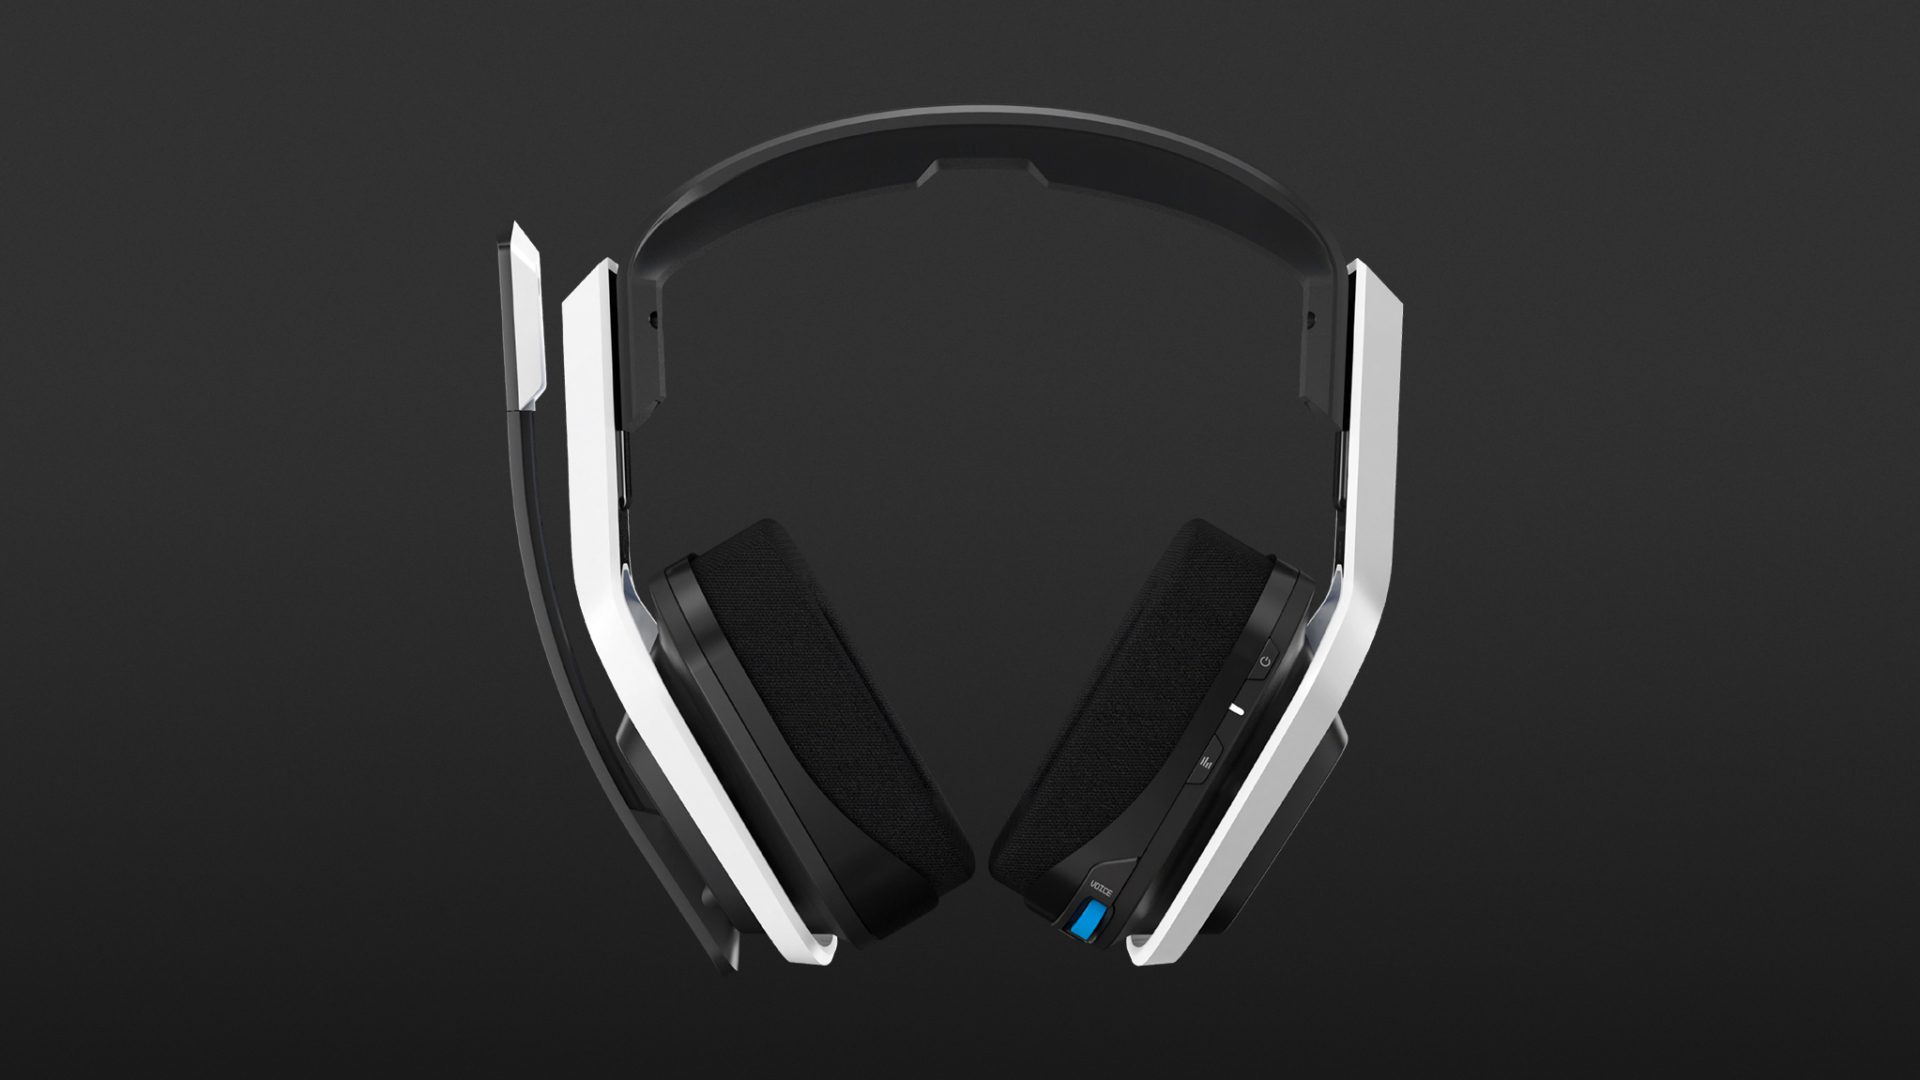 Astro A20 Gen 2 Wireless Stereo Over-the-Ear Gaming Headset XBox or PS 